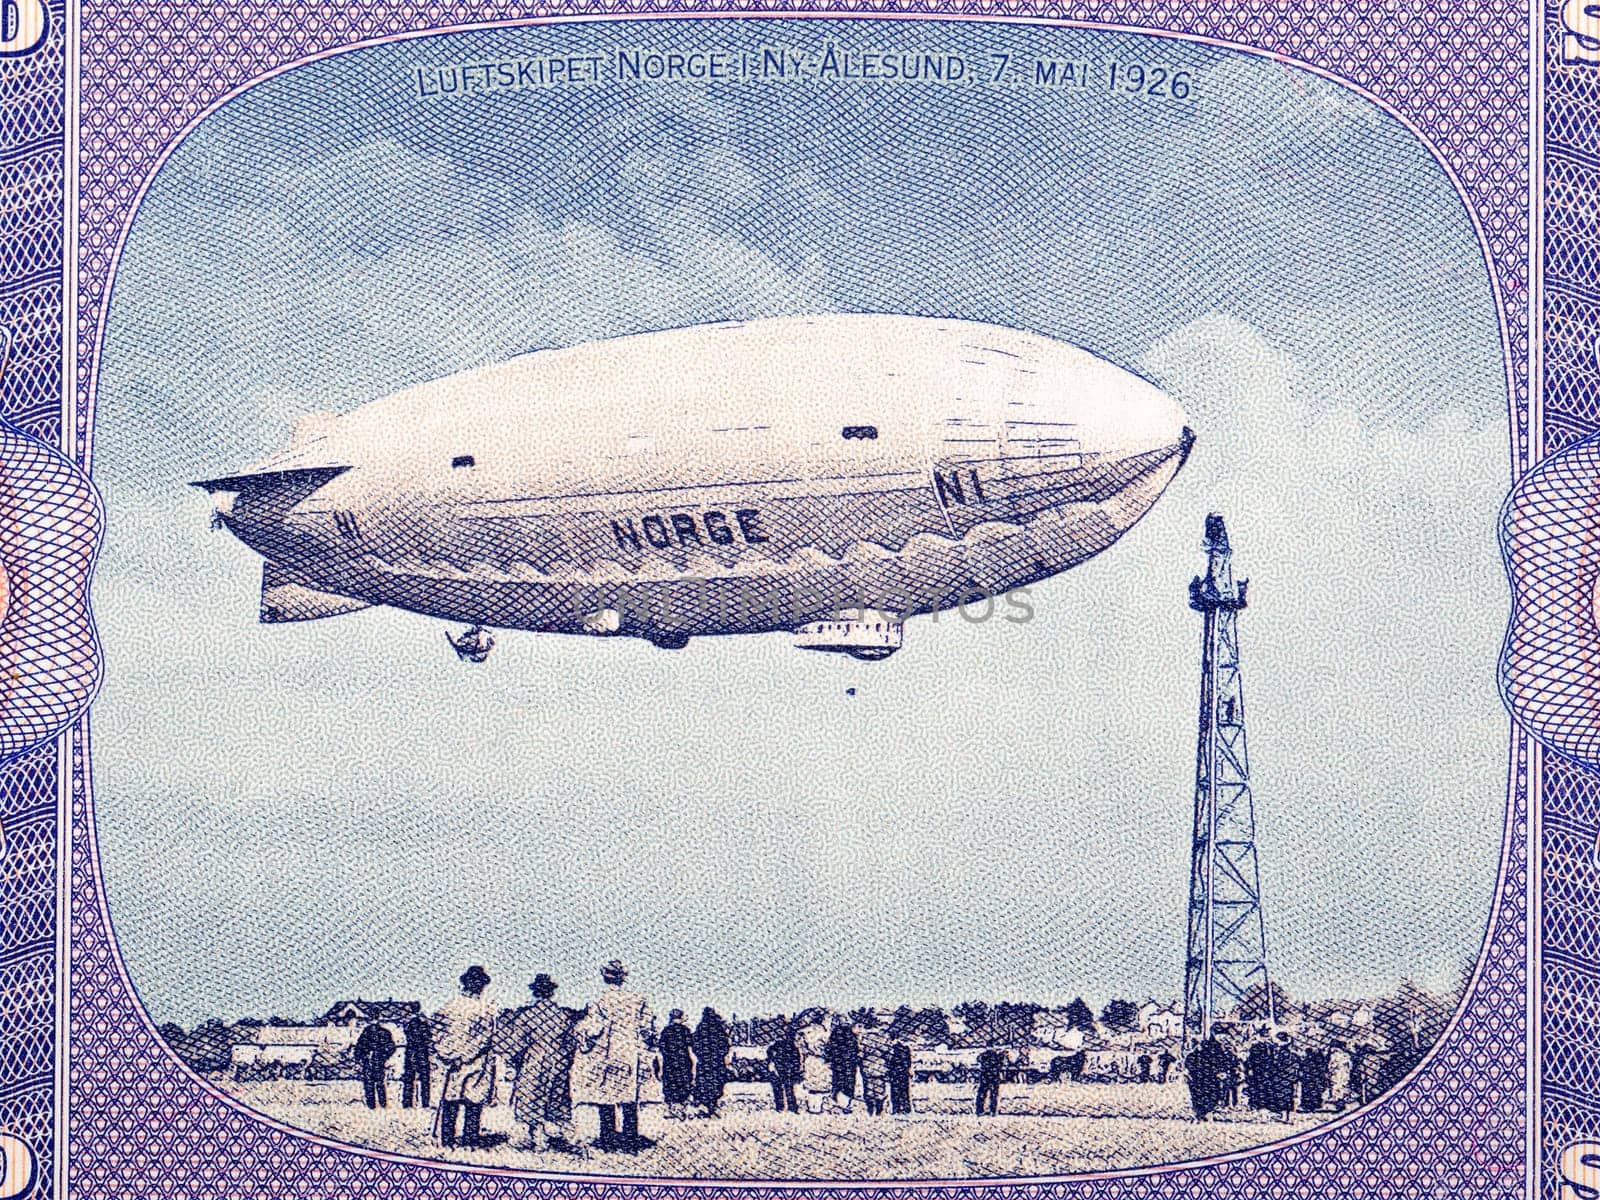 Airship Norge from norwegian money by johan10